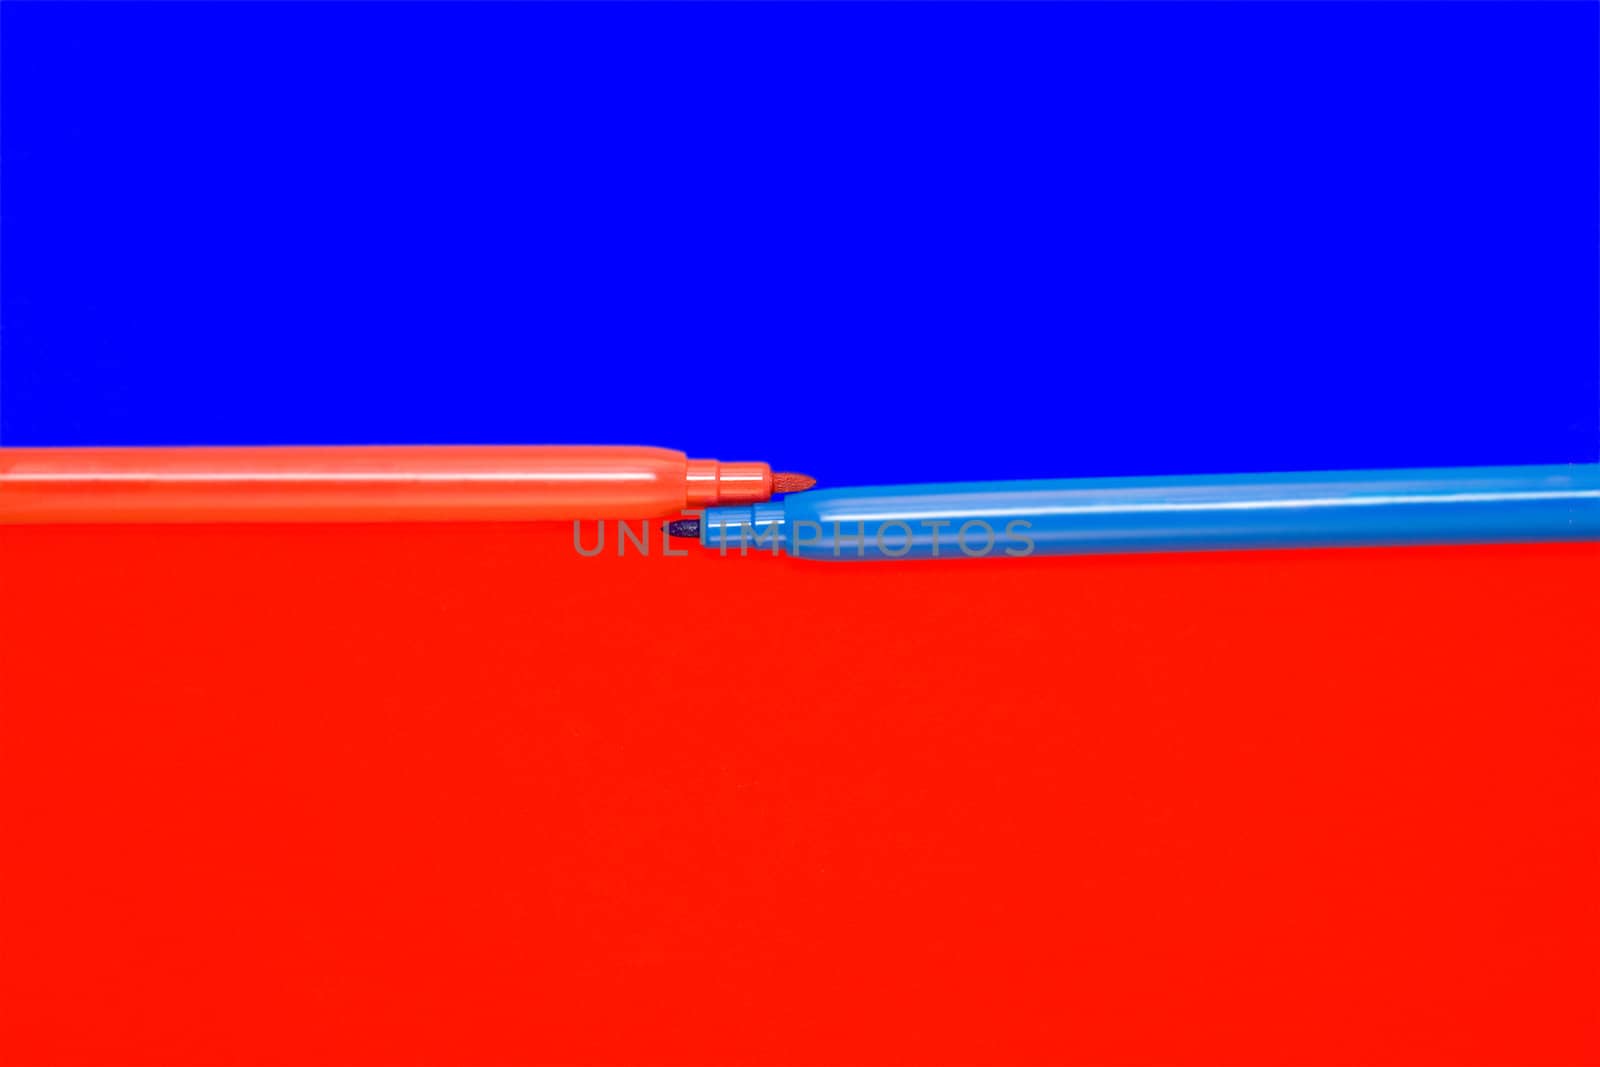 Red and blue felt-tip pens lay on a color background